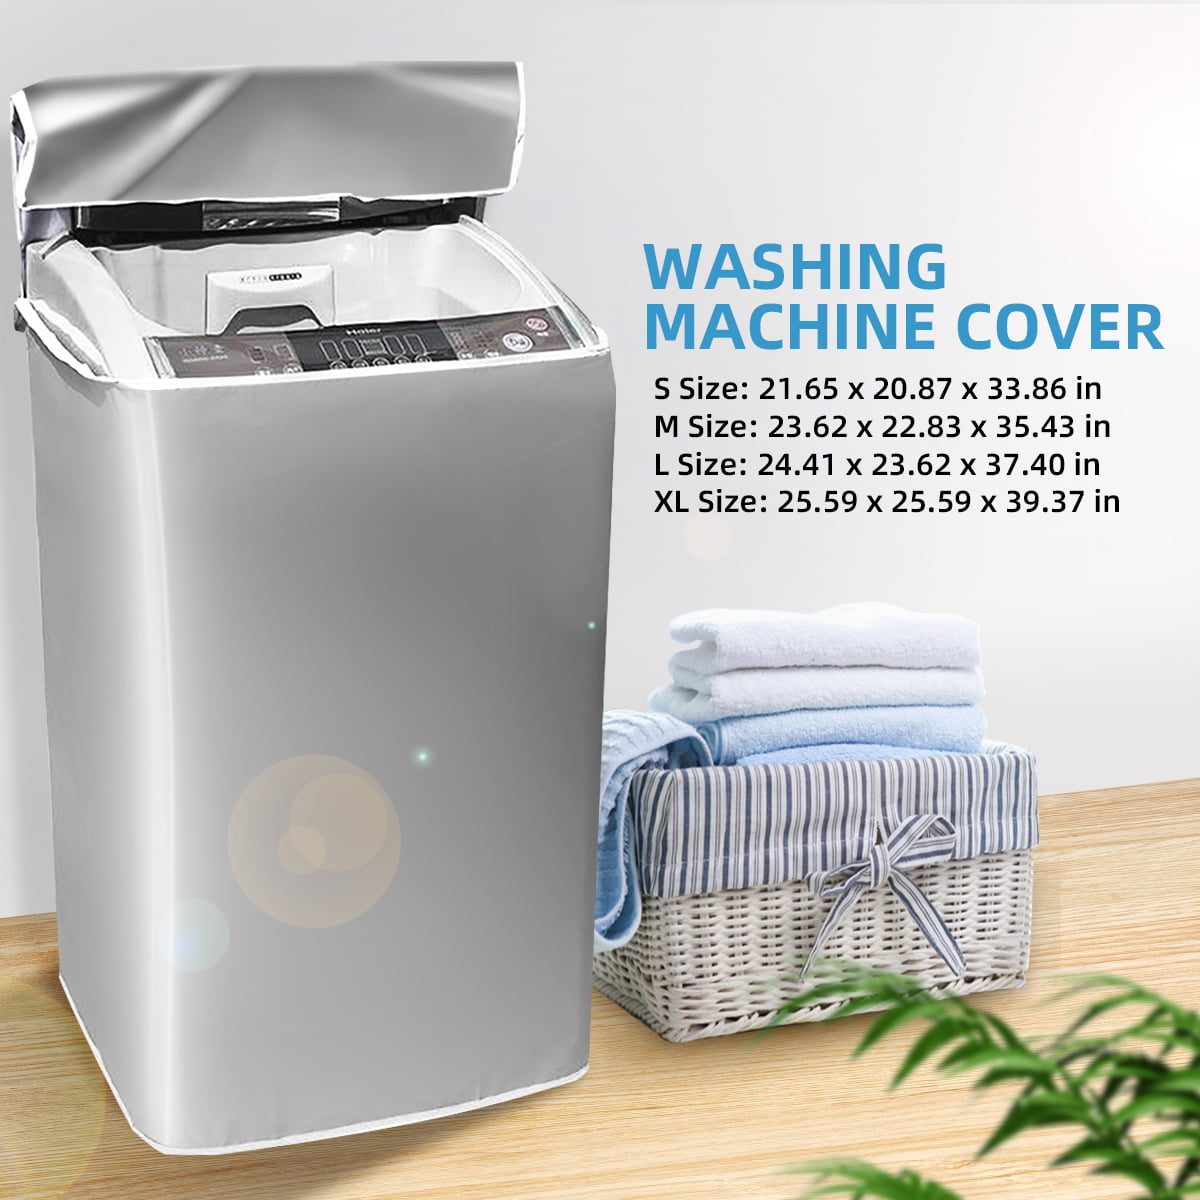 Details about   Waterproof Washing Machine Cover Dustproof Washer Protection Dryer Roller Sun 